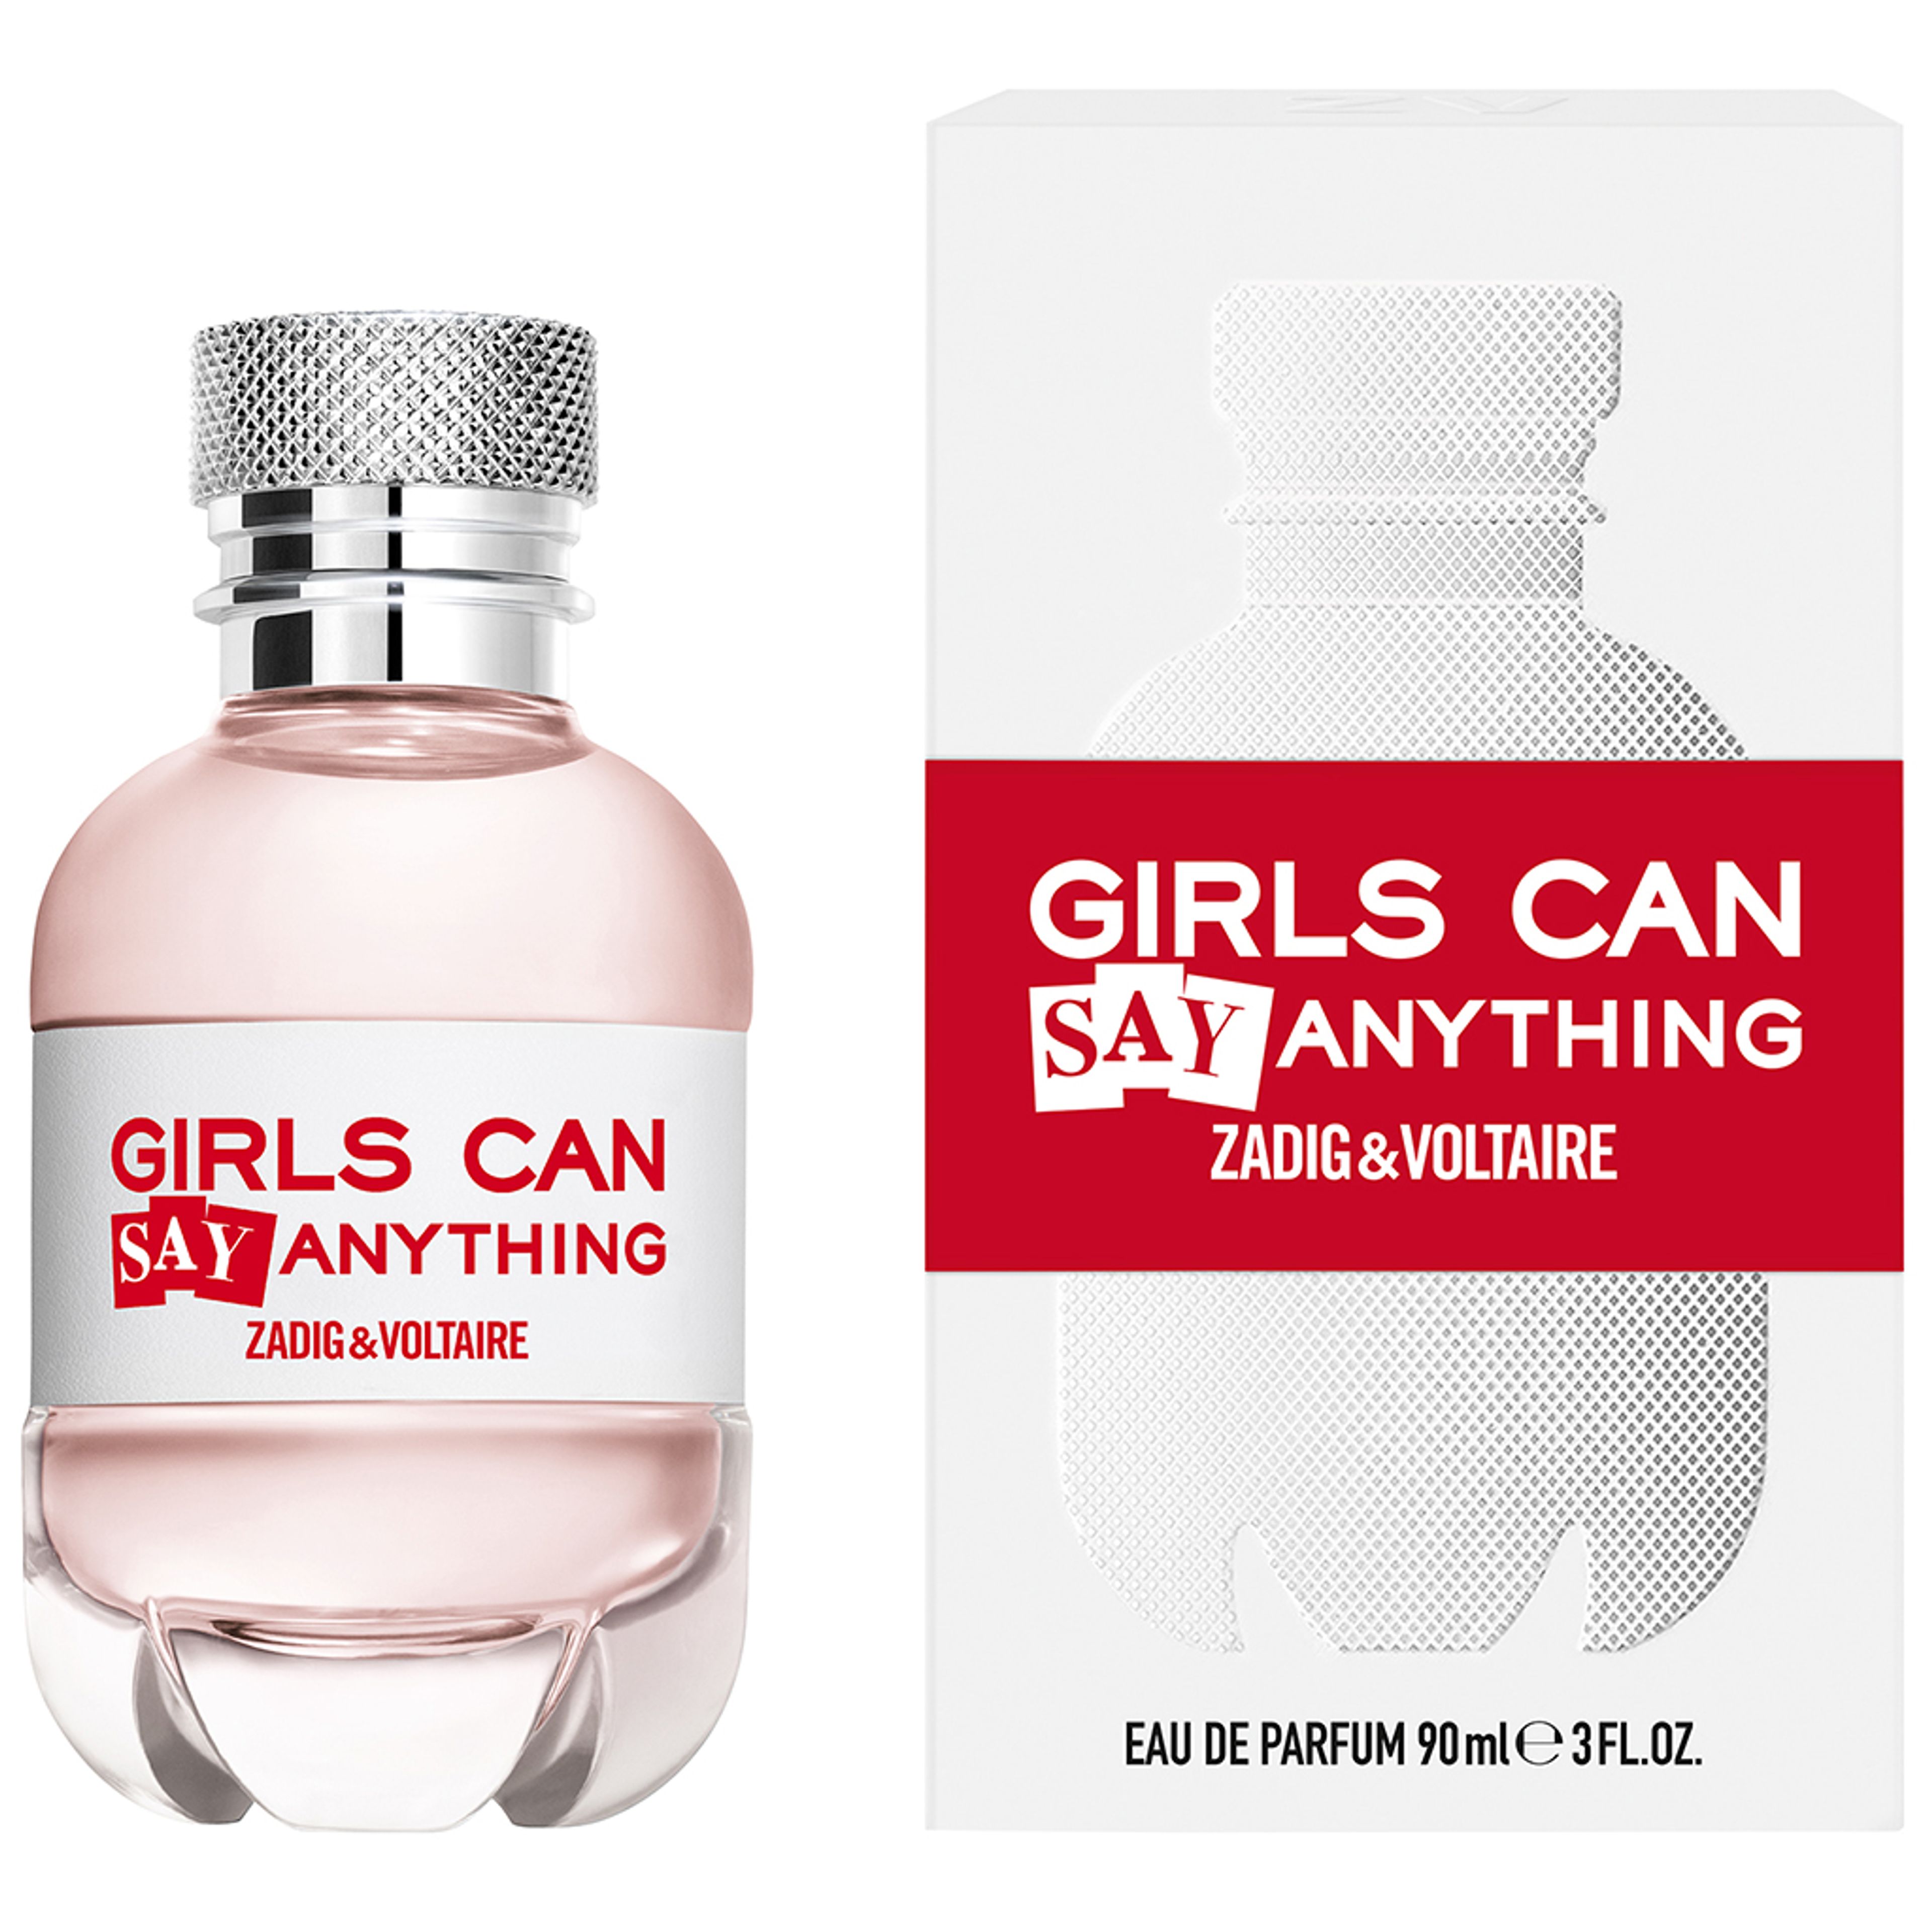 Zadig & Voltaire Girls Can Say Anything Eau De Parfum 2